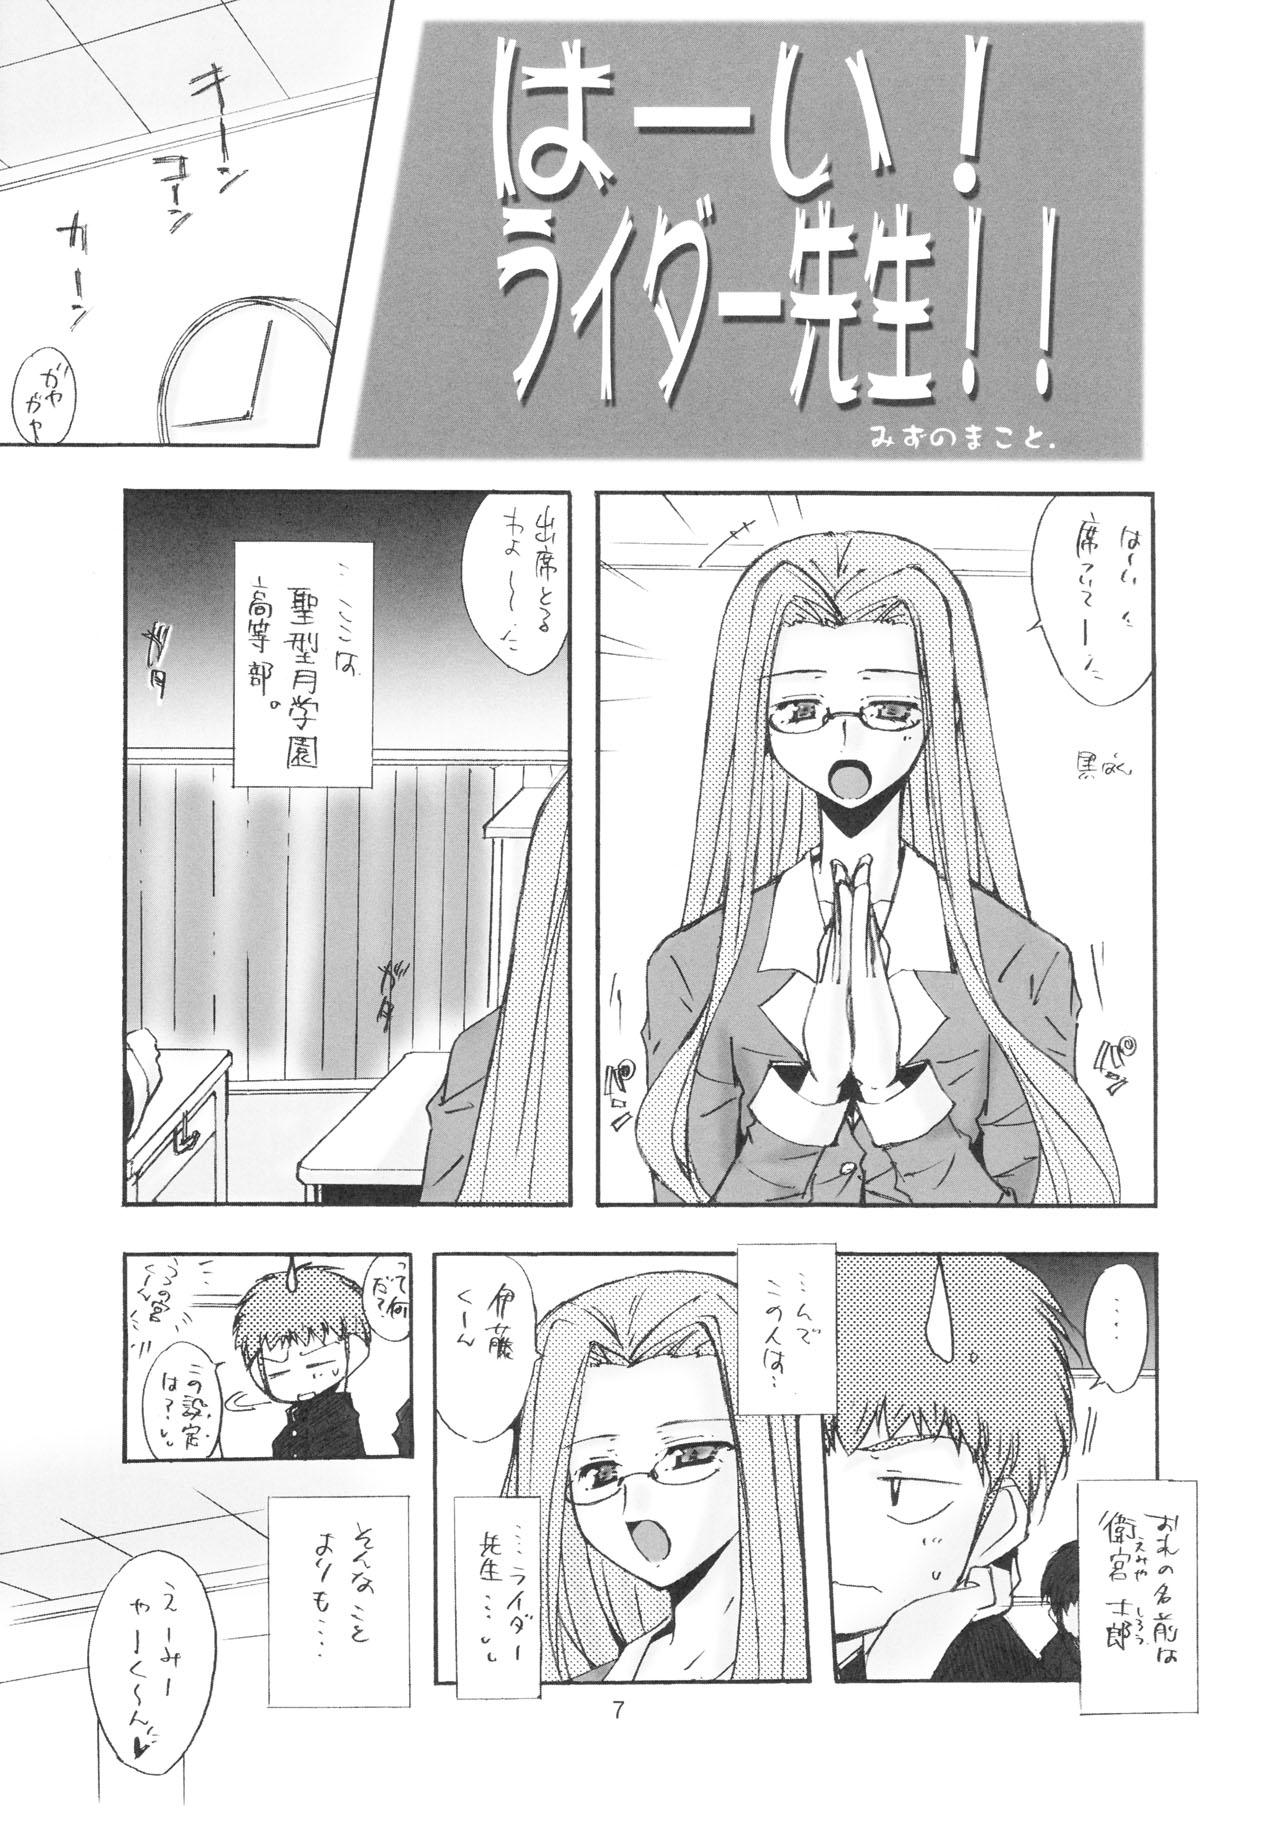 Sloppy Blowjob PURPLE DIGNITY - Fate stay night Amateurs - Page 4